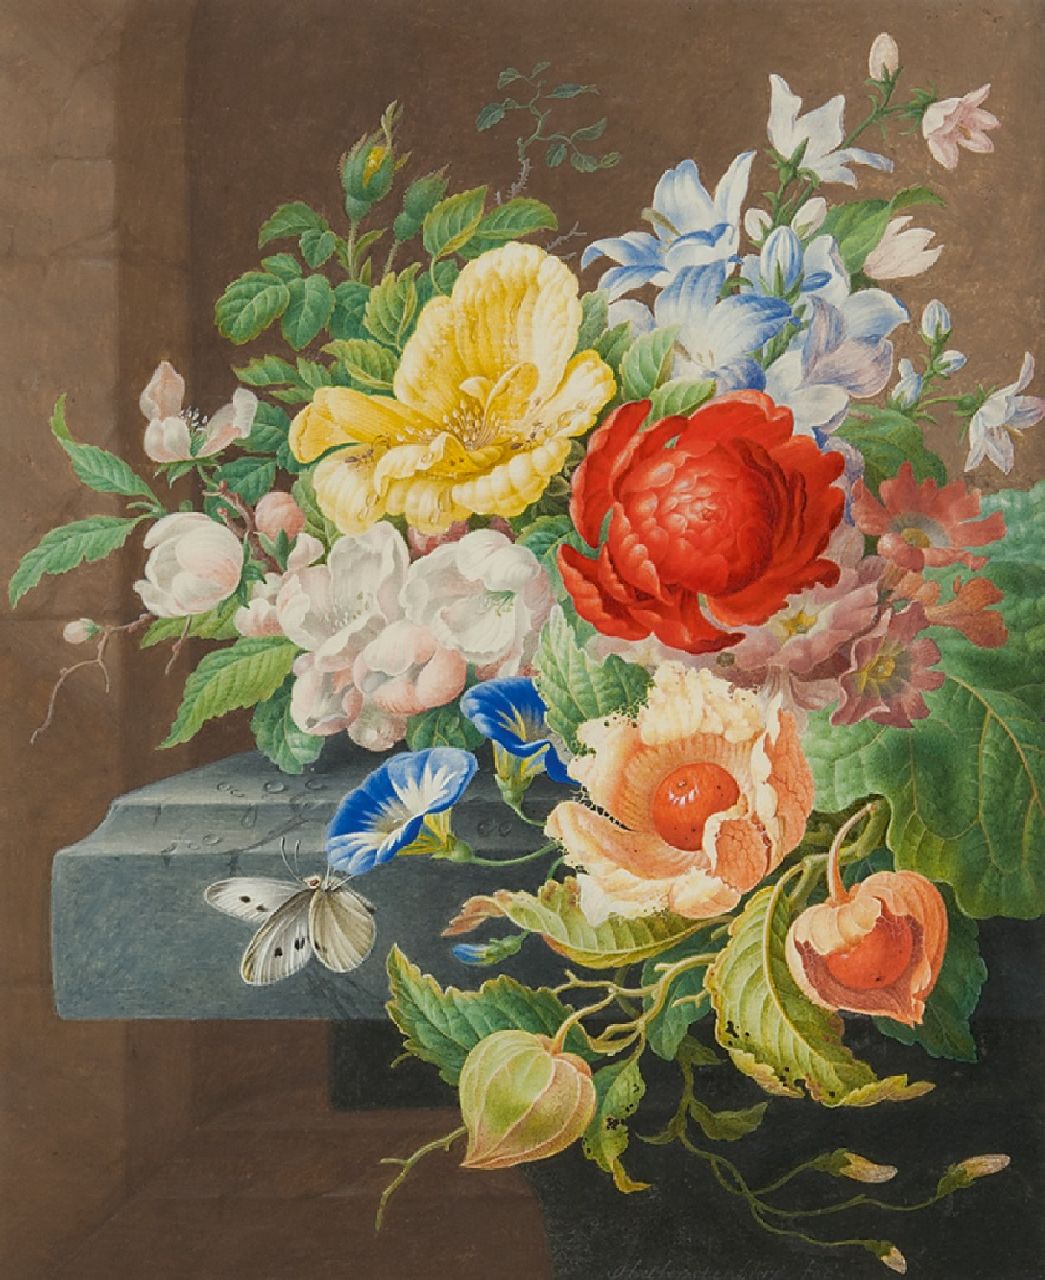 Henstenburgh H.  | Herman Henstenburgh | Watercolours and drawings offered for sale | Still life with flowers and a butterfly, watercolour on paper 31.0 x 25.5 cm, signed l.m. and painted ca. 1700